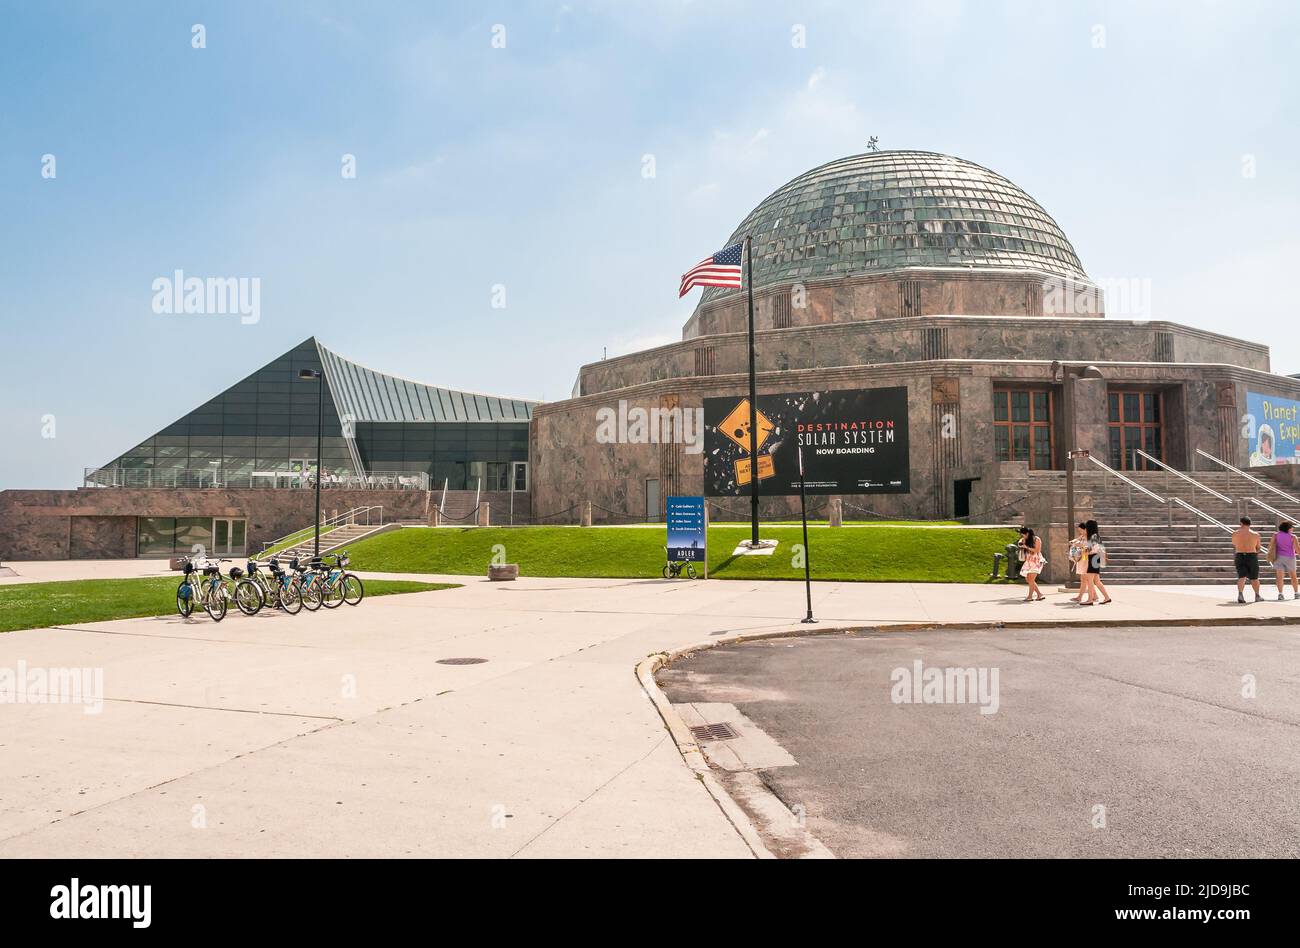 Chicago, Illinois, USA - August 25, 2014: Adler Planetarium, is a public museum dedicated to the study of astronomy and astrophysics, located at the s Stock Photo